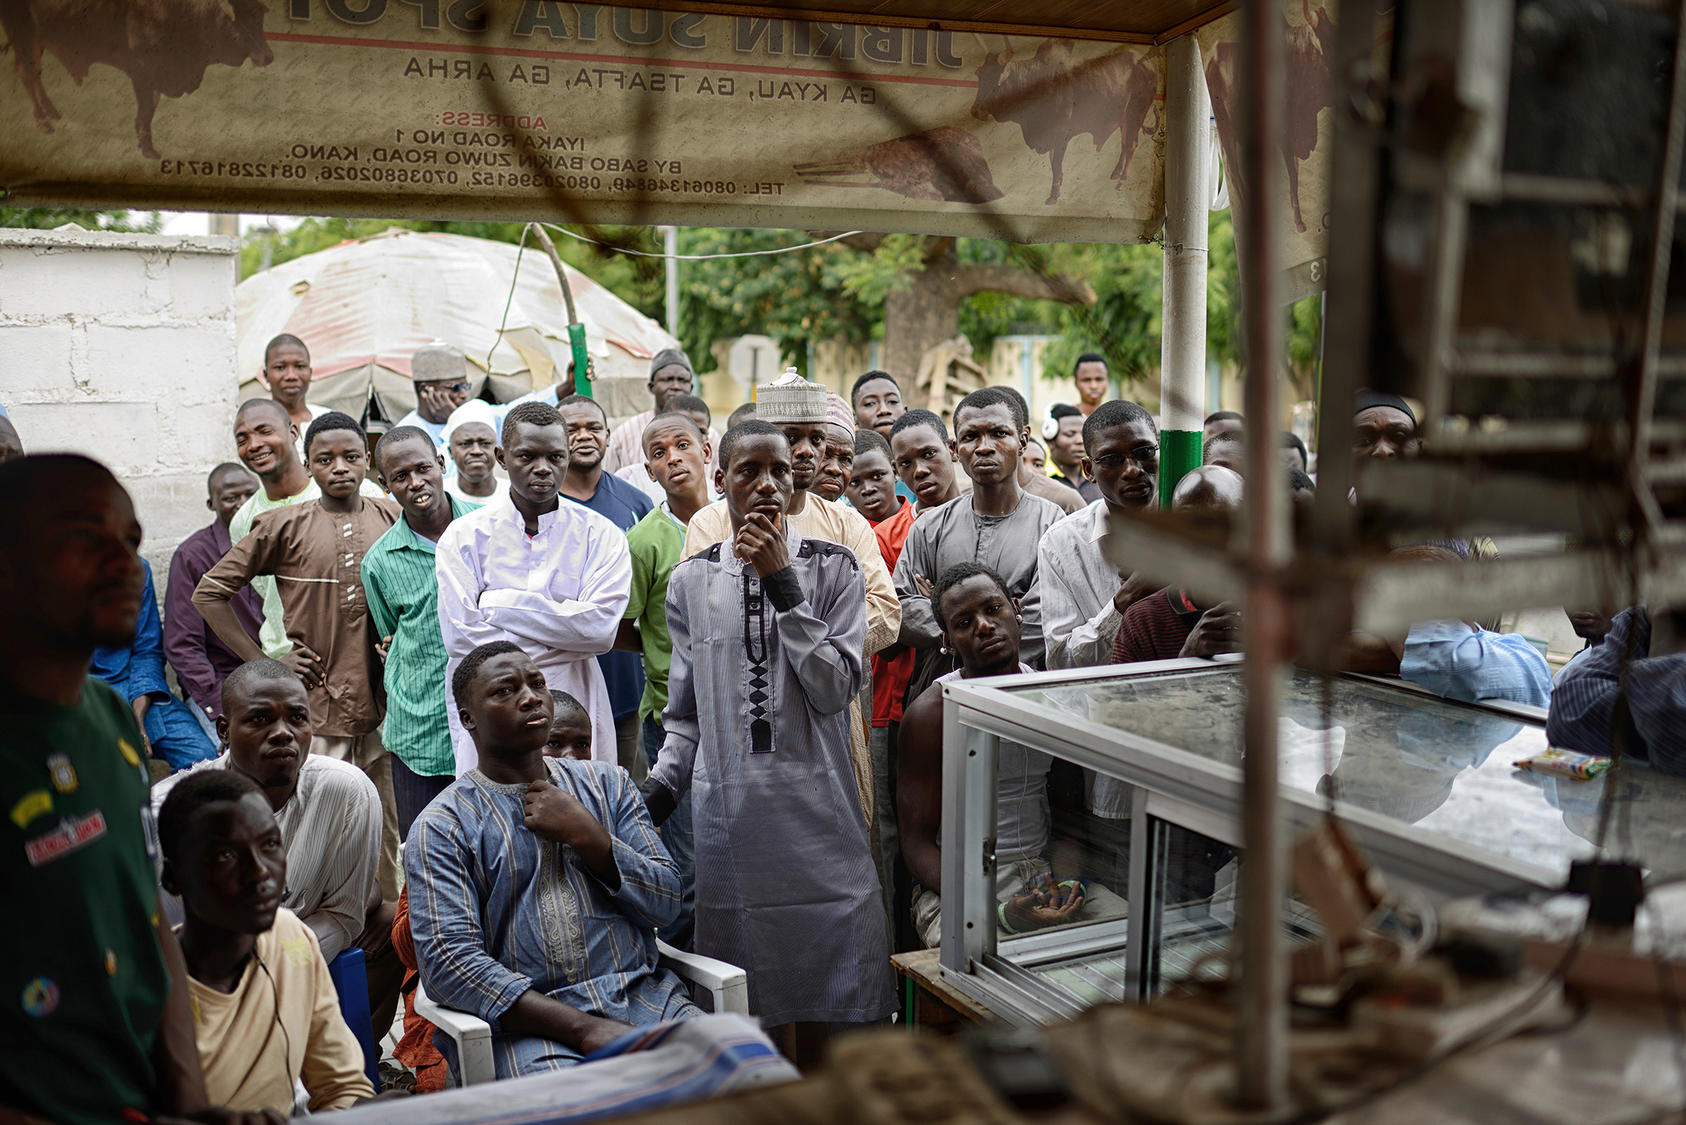 People gather and watch election coverage at a small market in Kano, northern Nigeria, March 31, 2015. (Samuel Aranda/The New York Times)